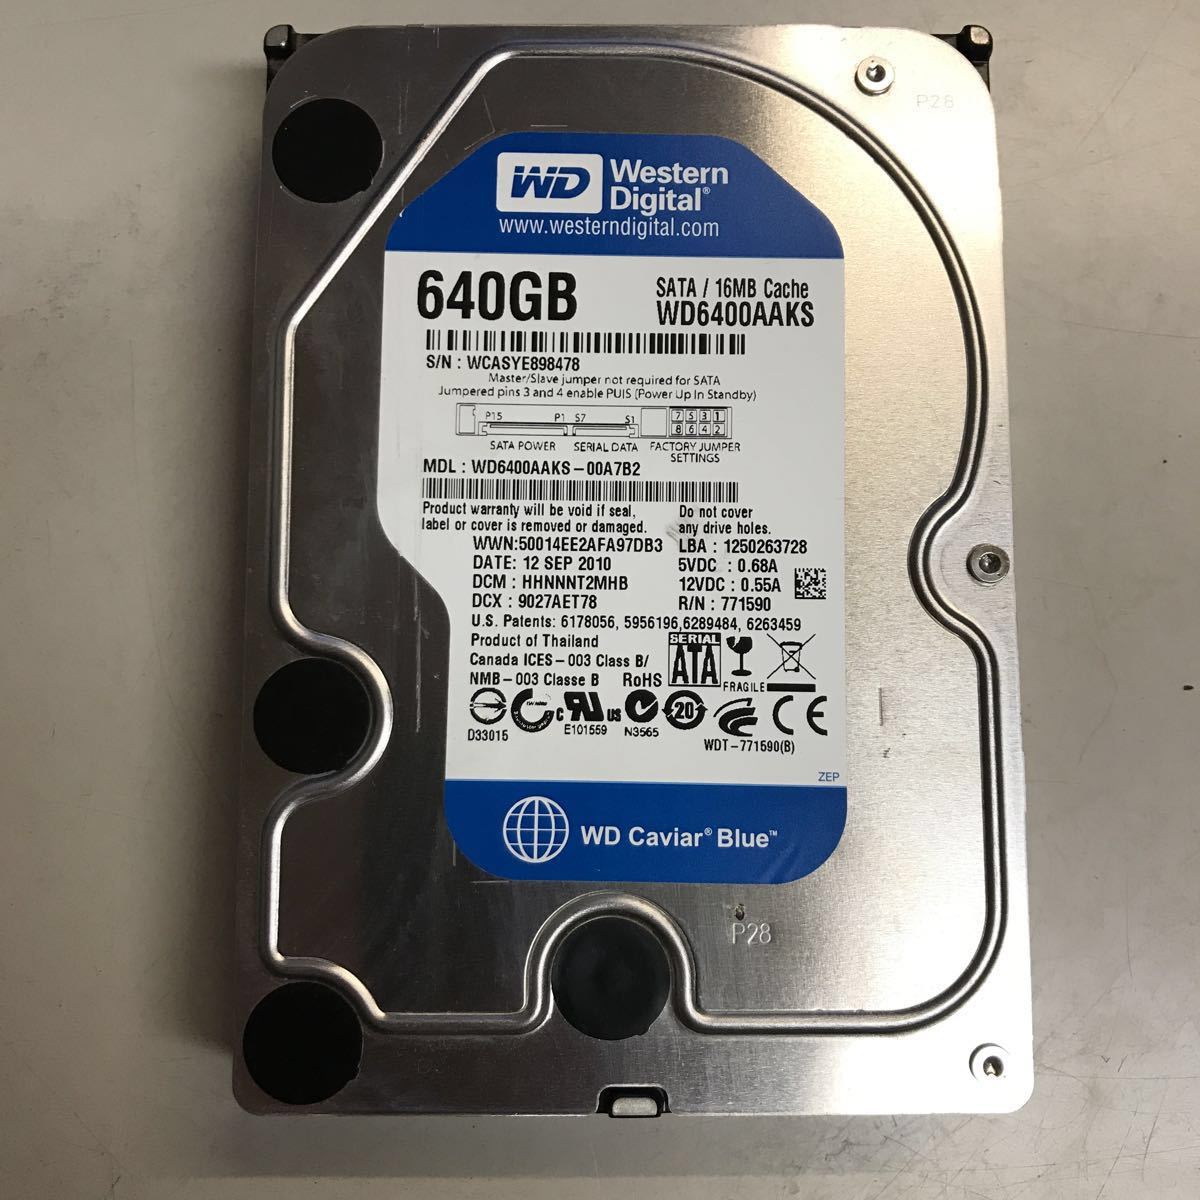 HDD 640GB WD6400AAKS e89